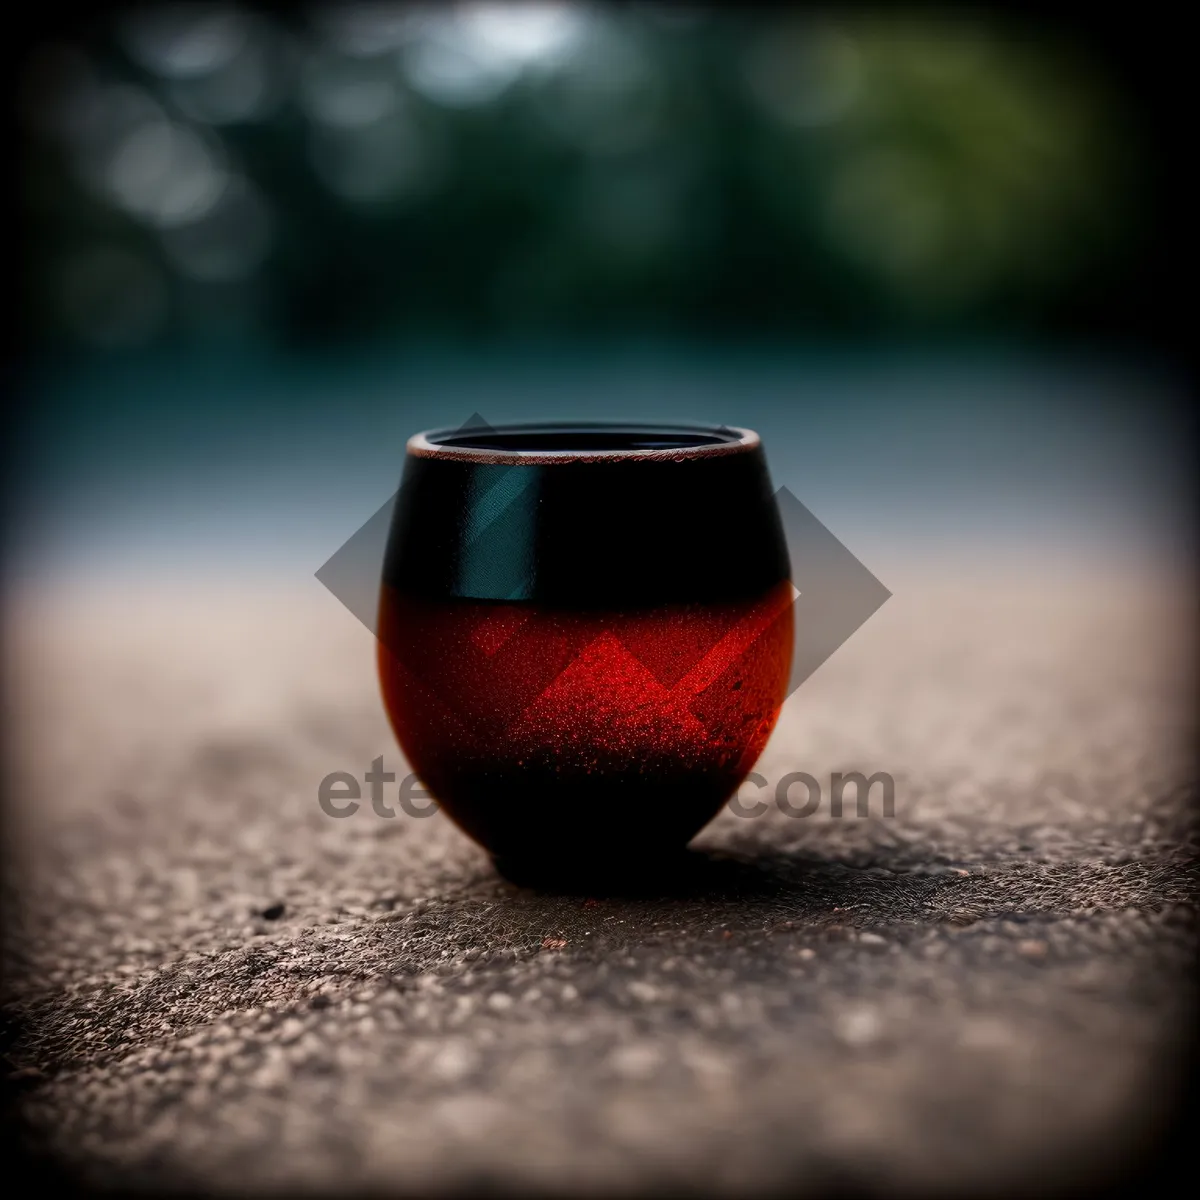 Picture of Burgundy Elegance: Red Wine in a Stylish Wineglass